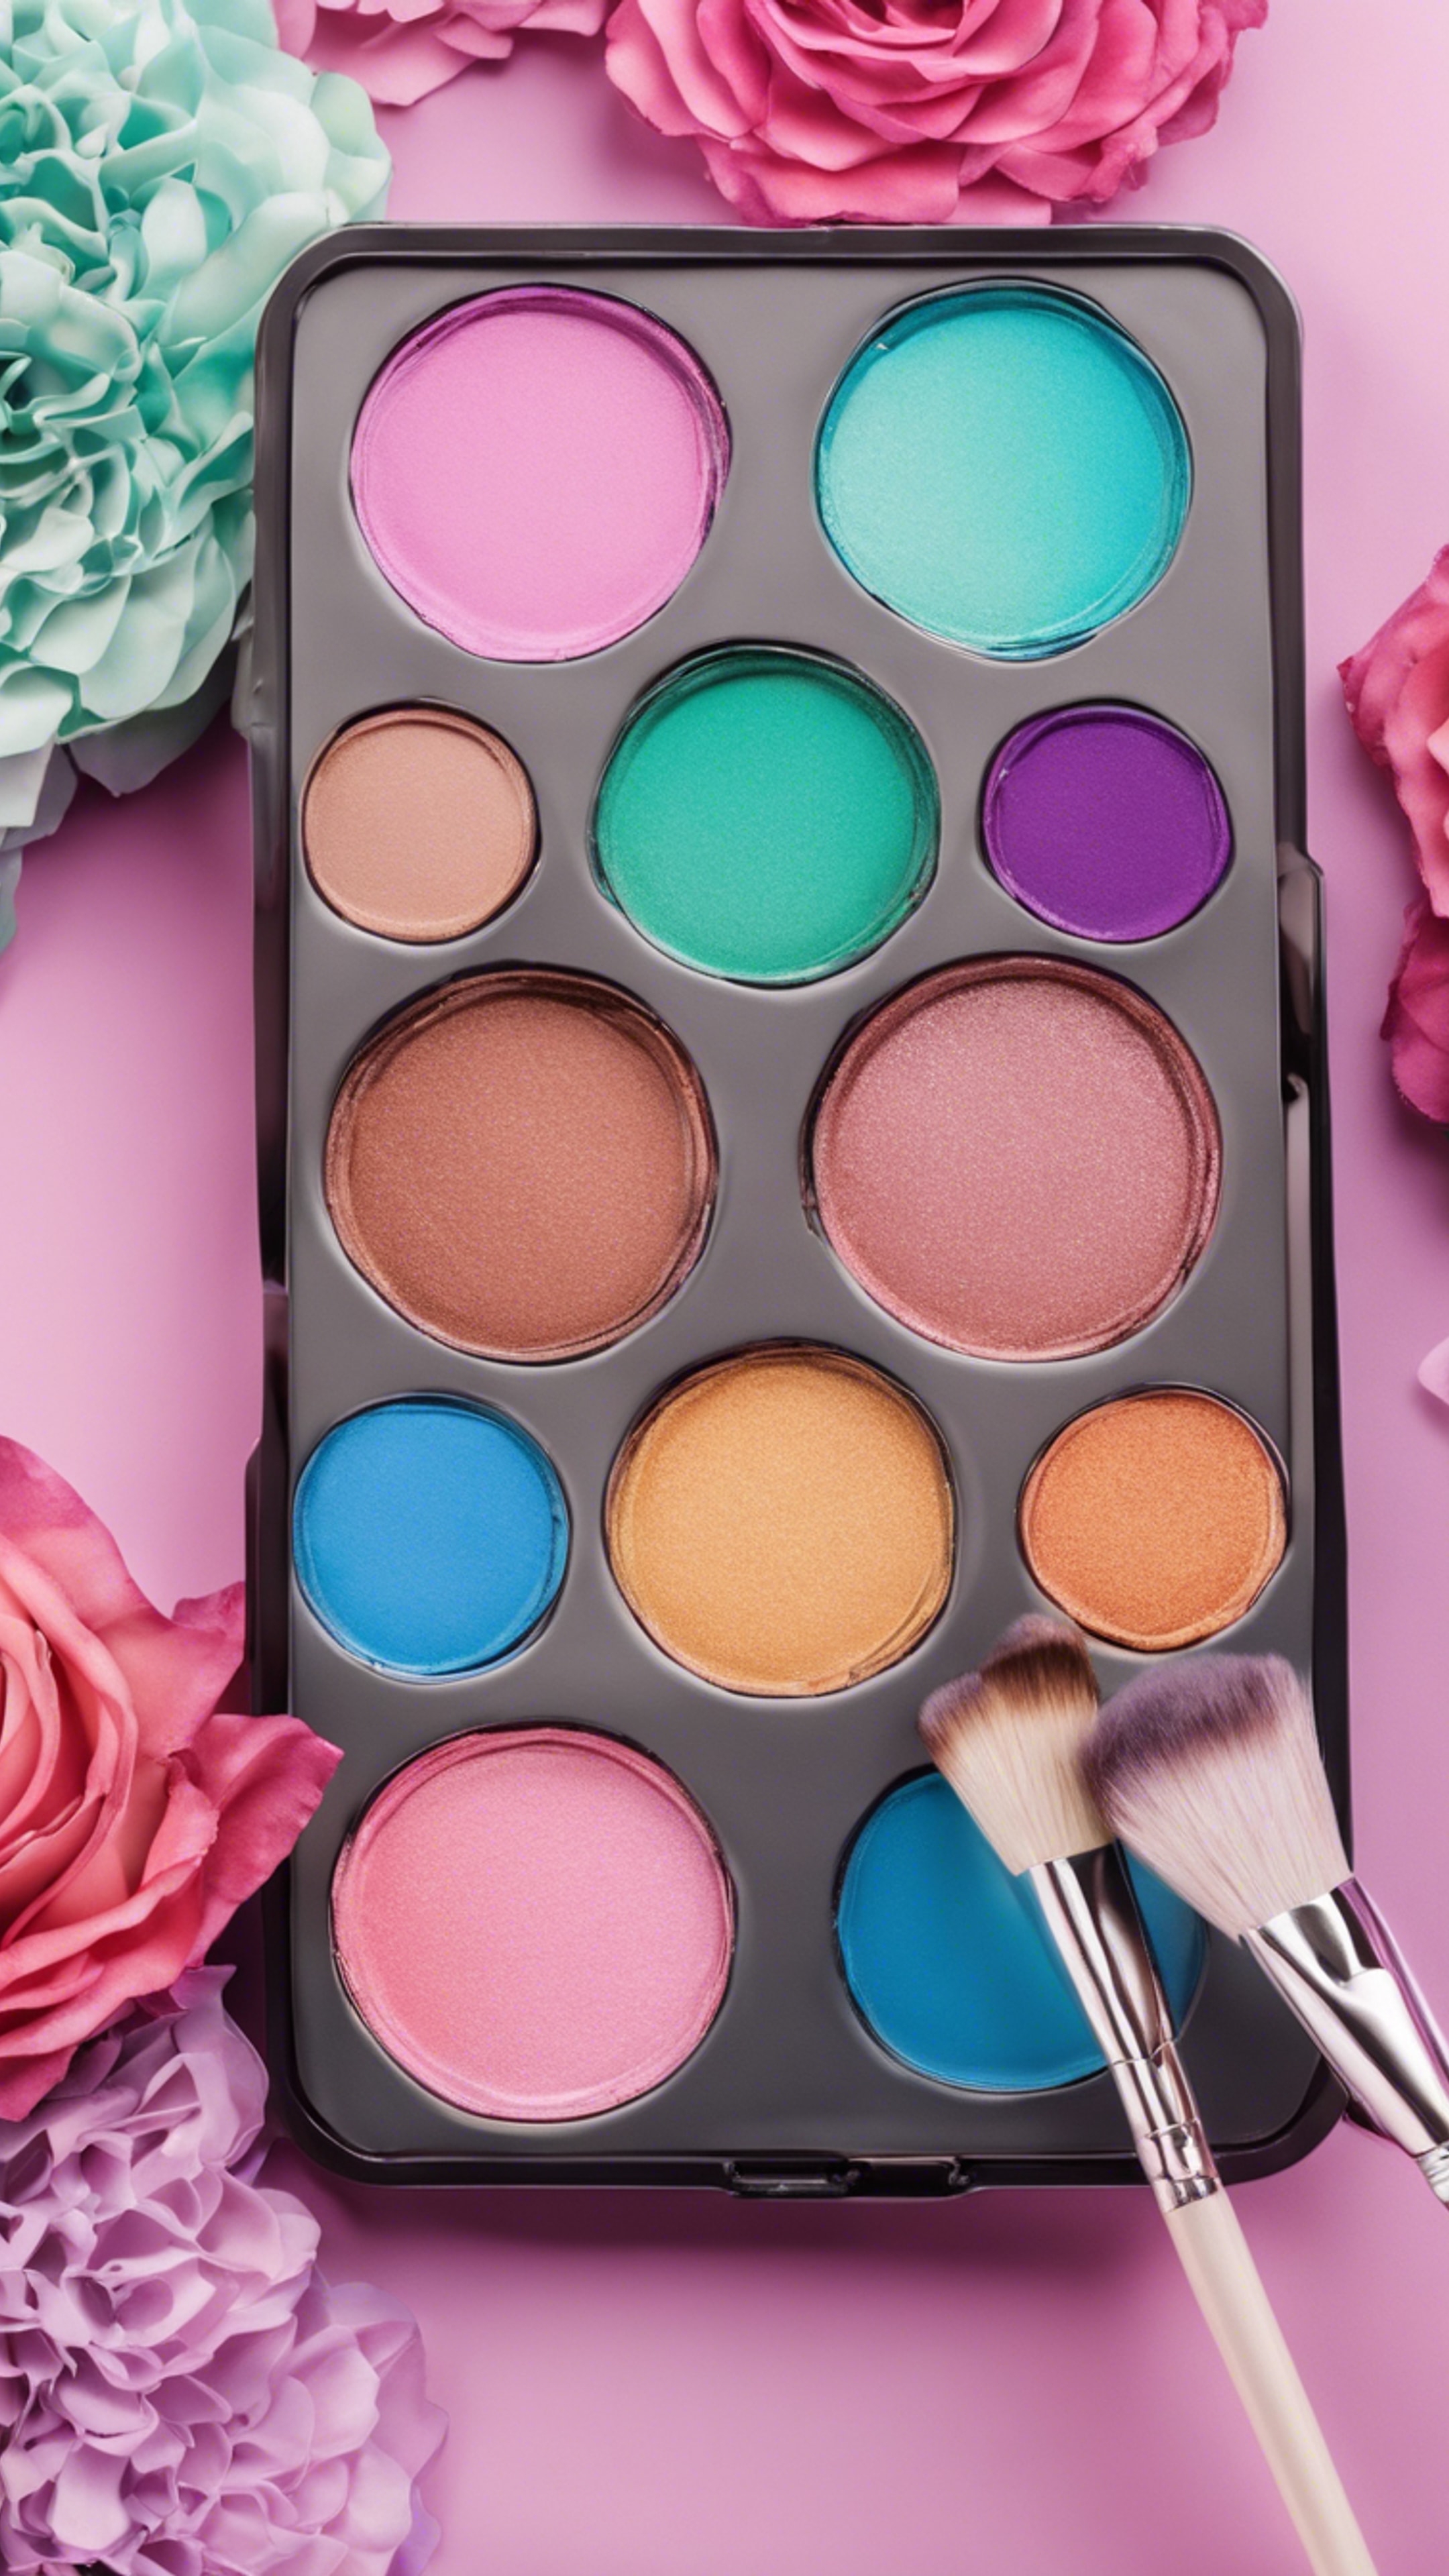 A cute girly makeup palette with a variety of vibrant colors and a brush for application. Fond d'écran[6f3ccf3758d549978770]